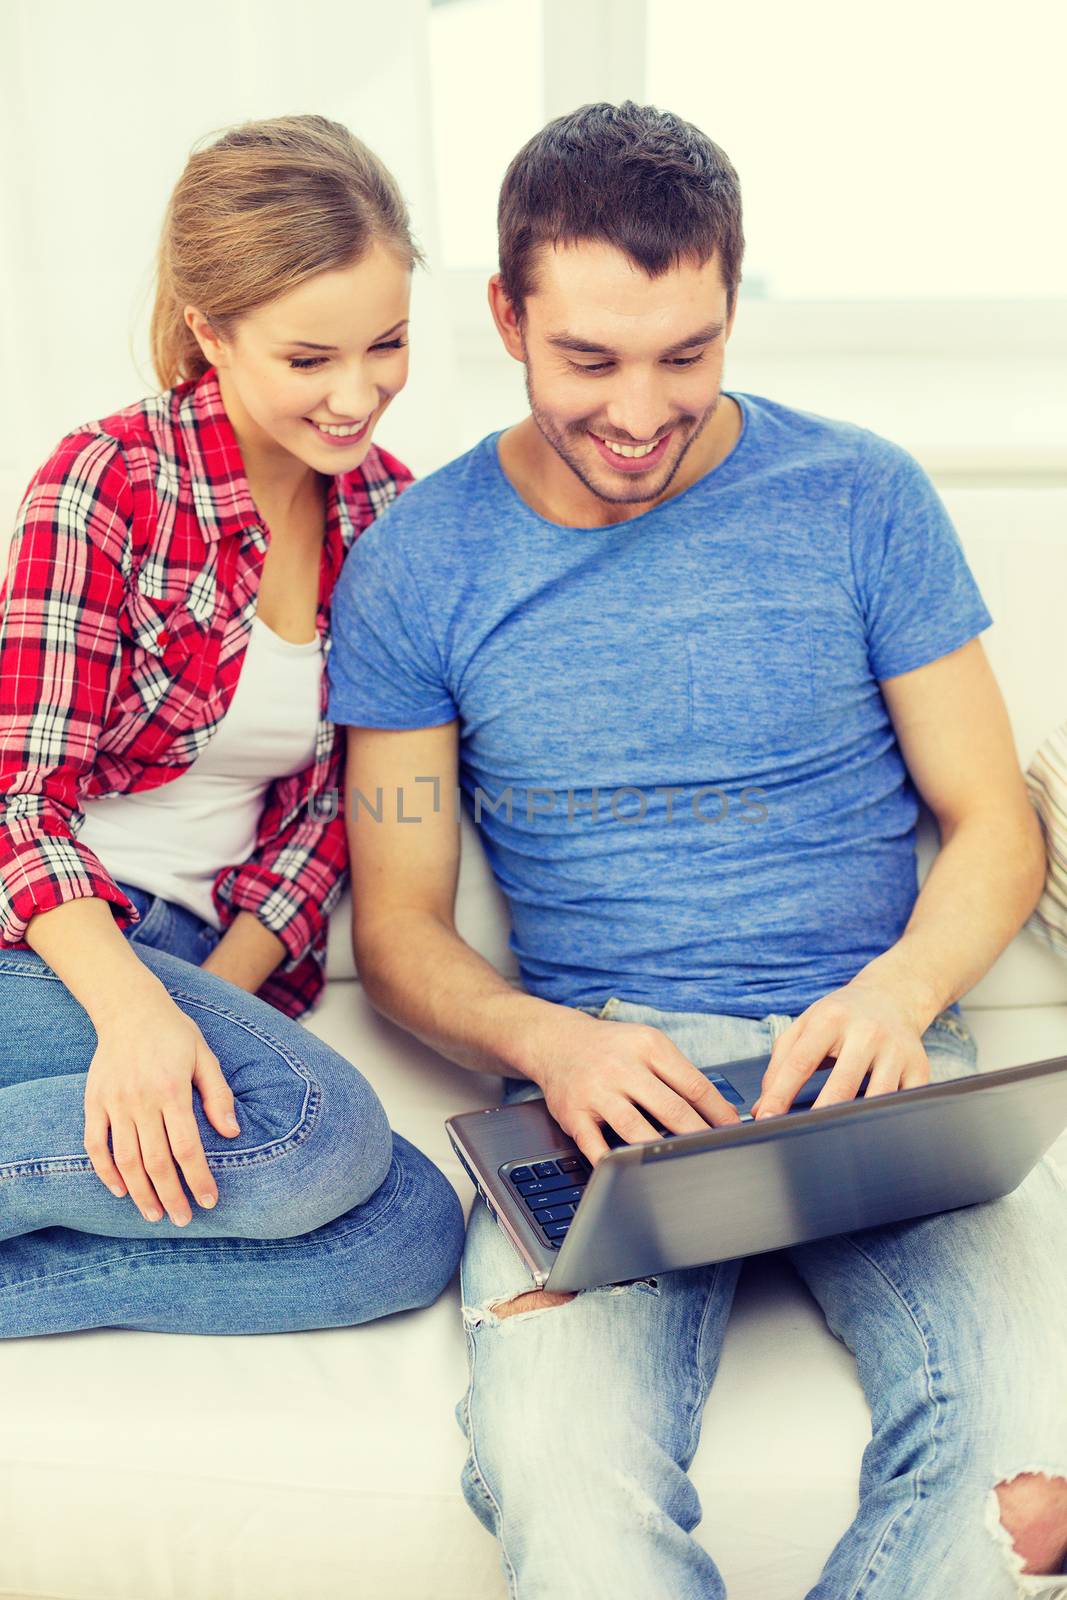 home, technology and relationships concept - smiling couple with laptop computer at home